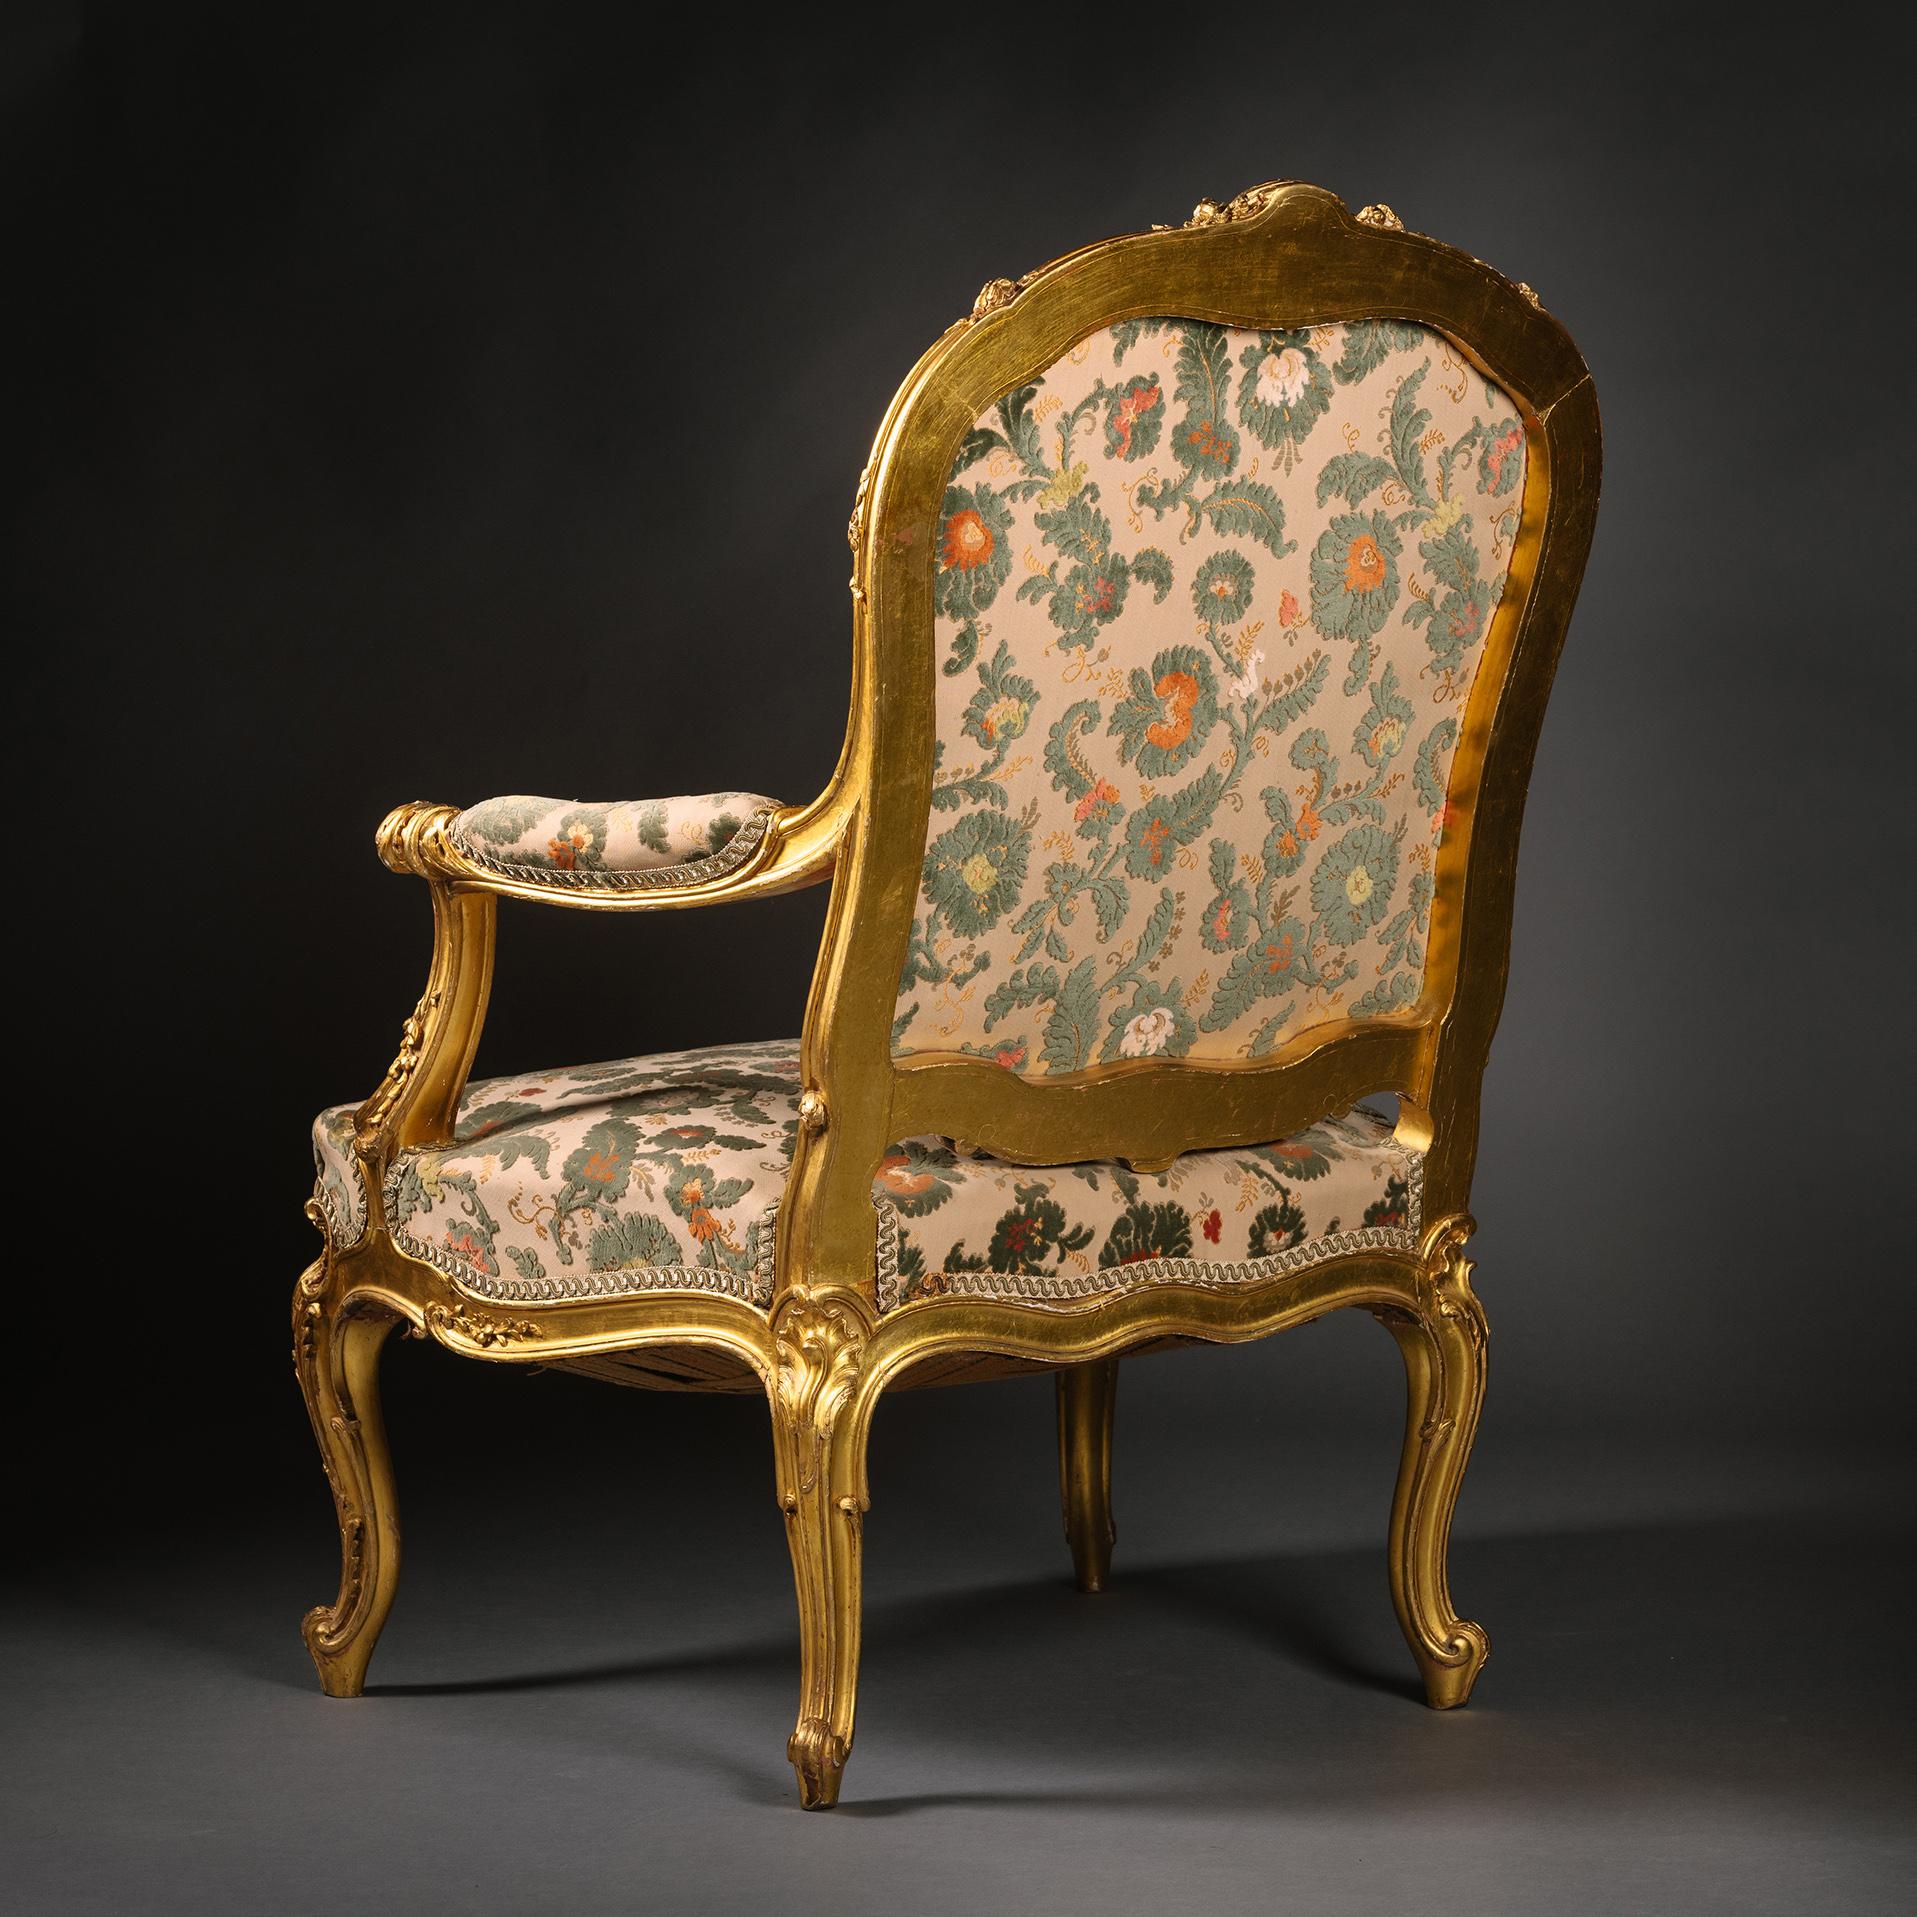 A Rare Louis XV Style Giltwood Fauteuil By François Linke, Paris.

The scroll and channelled frame beautifully carved with rocaille shells and trailing flowers. Reupholstered in acanthus pattern raised velvet. 

Stamped above the back leg